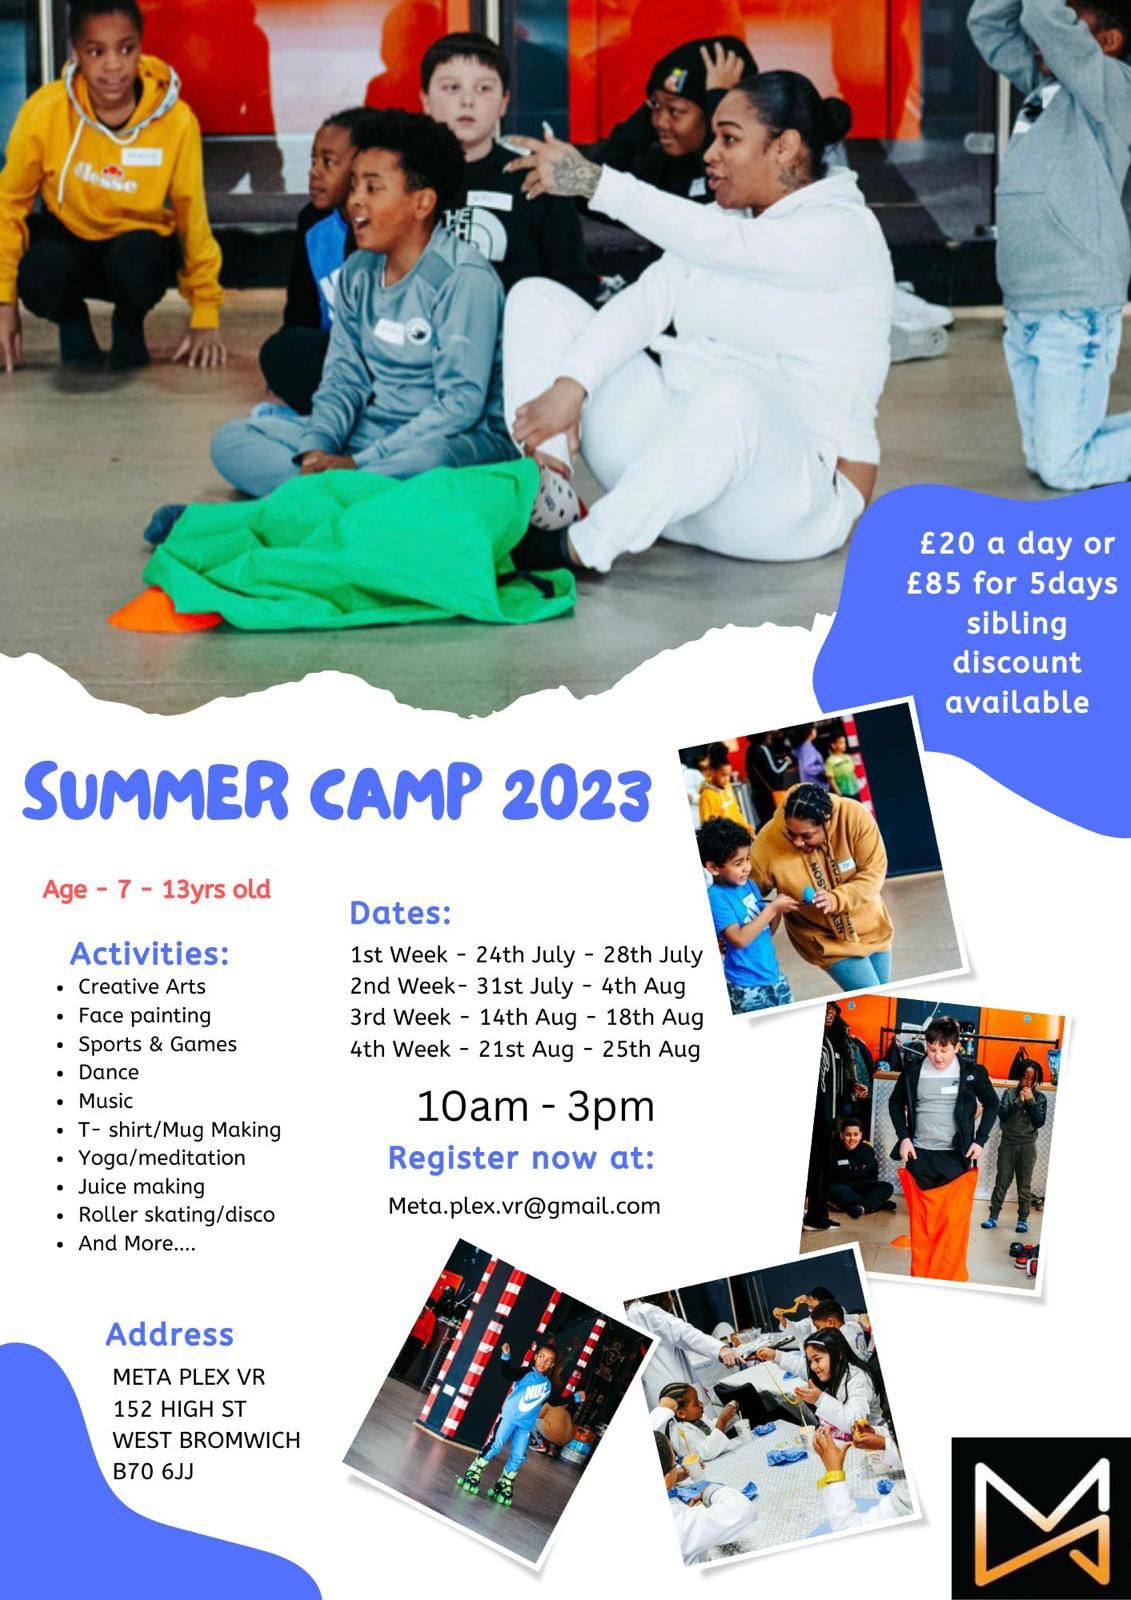 Summer Camp 2023 activities in West Bromwich